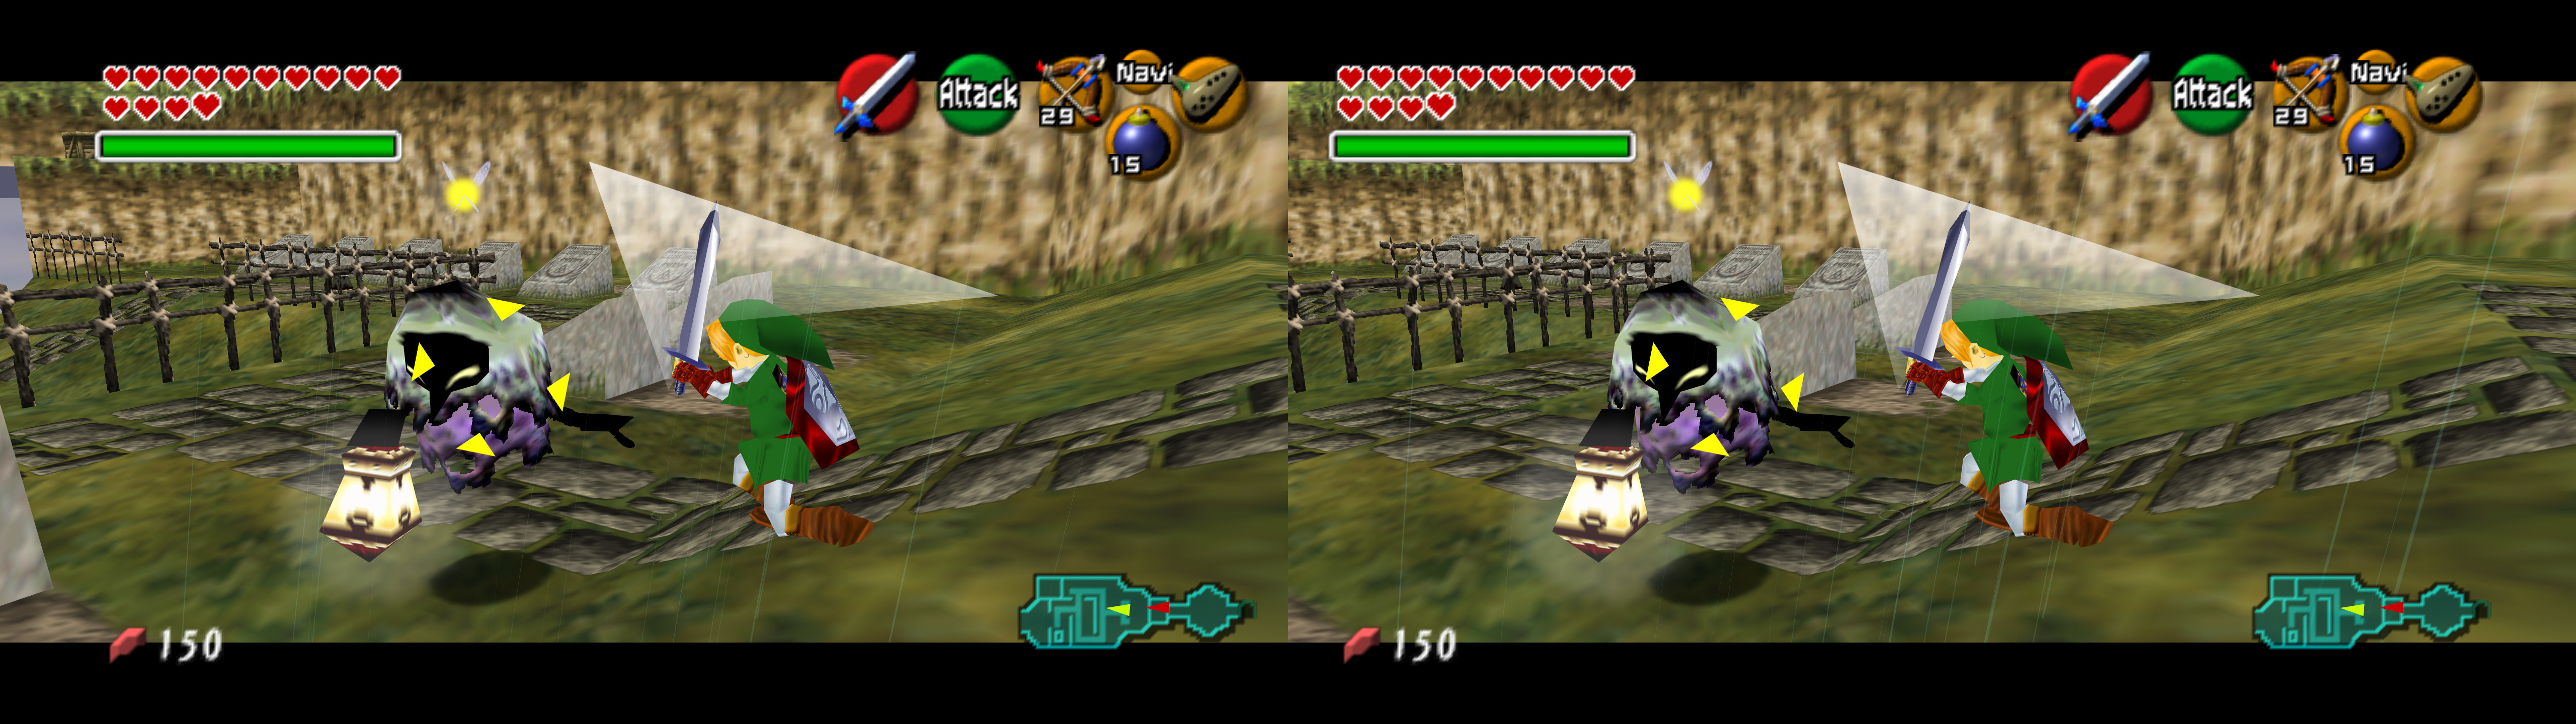 Check Out The Legend Of Zelda: Ocarina Of Time's PC 'Port